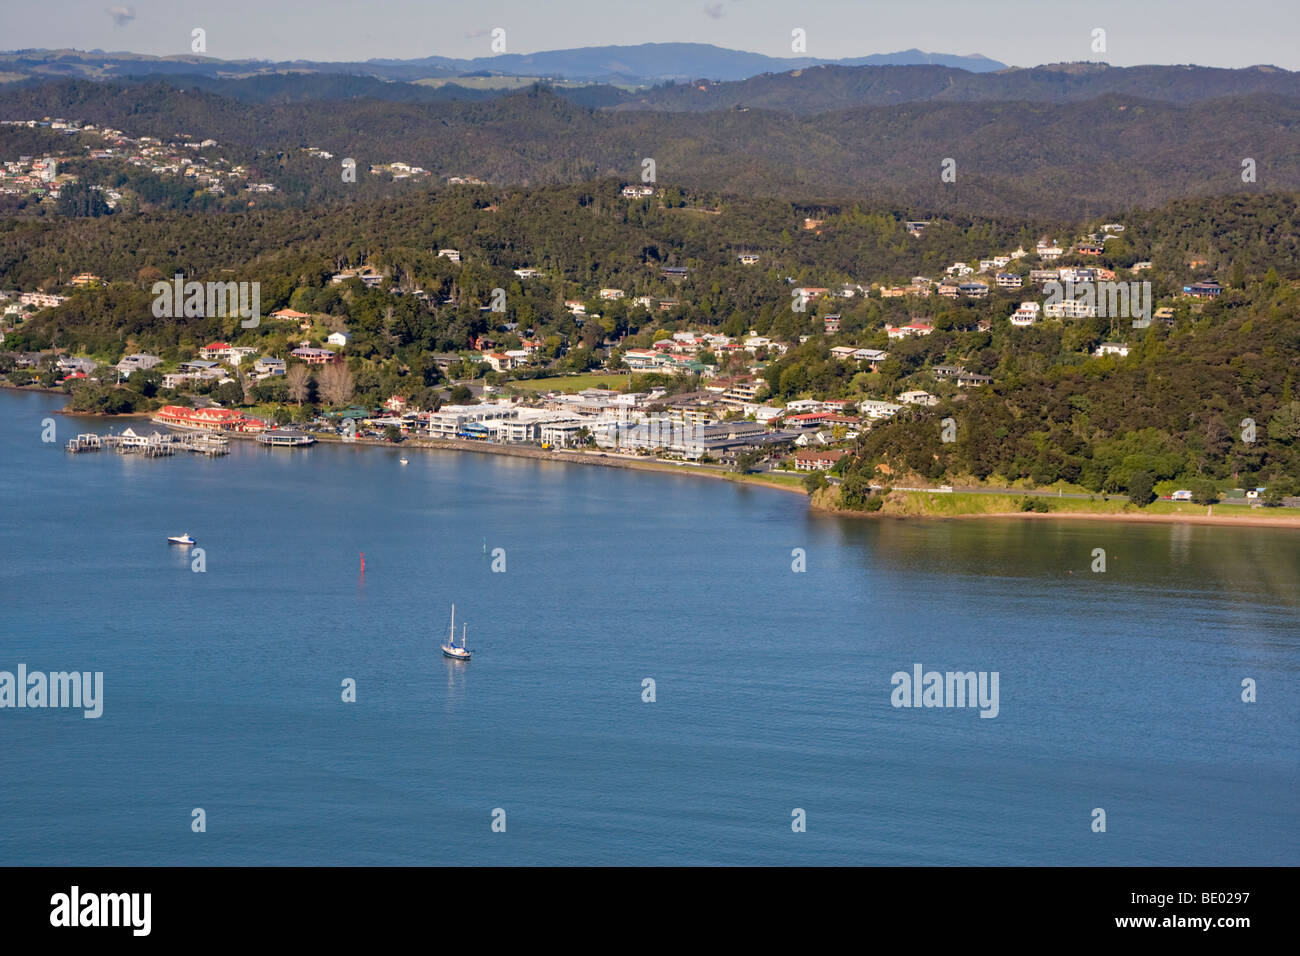 Aerial view of the town of Paihia, Northland, Bay of Islands, New Zealand Stock Photo